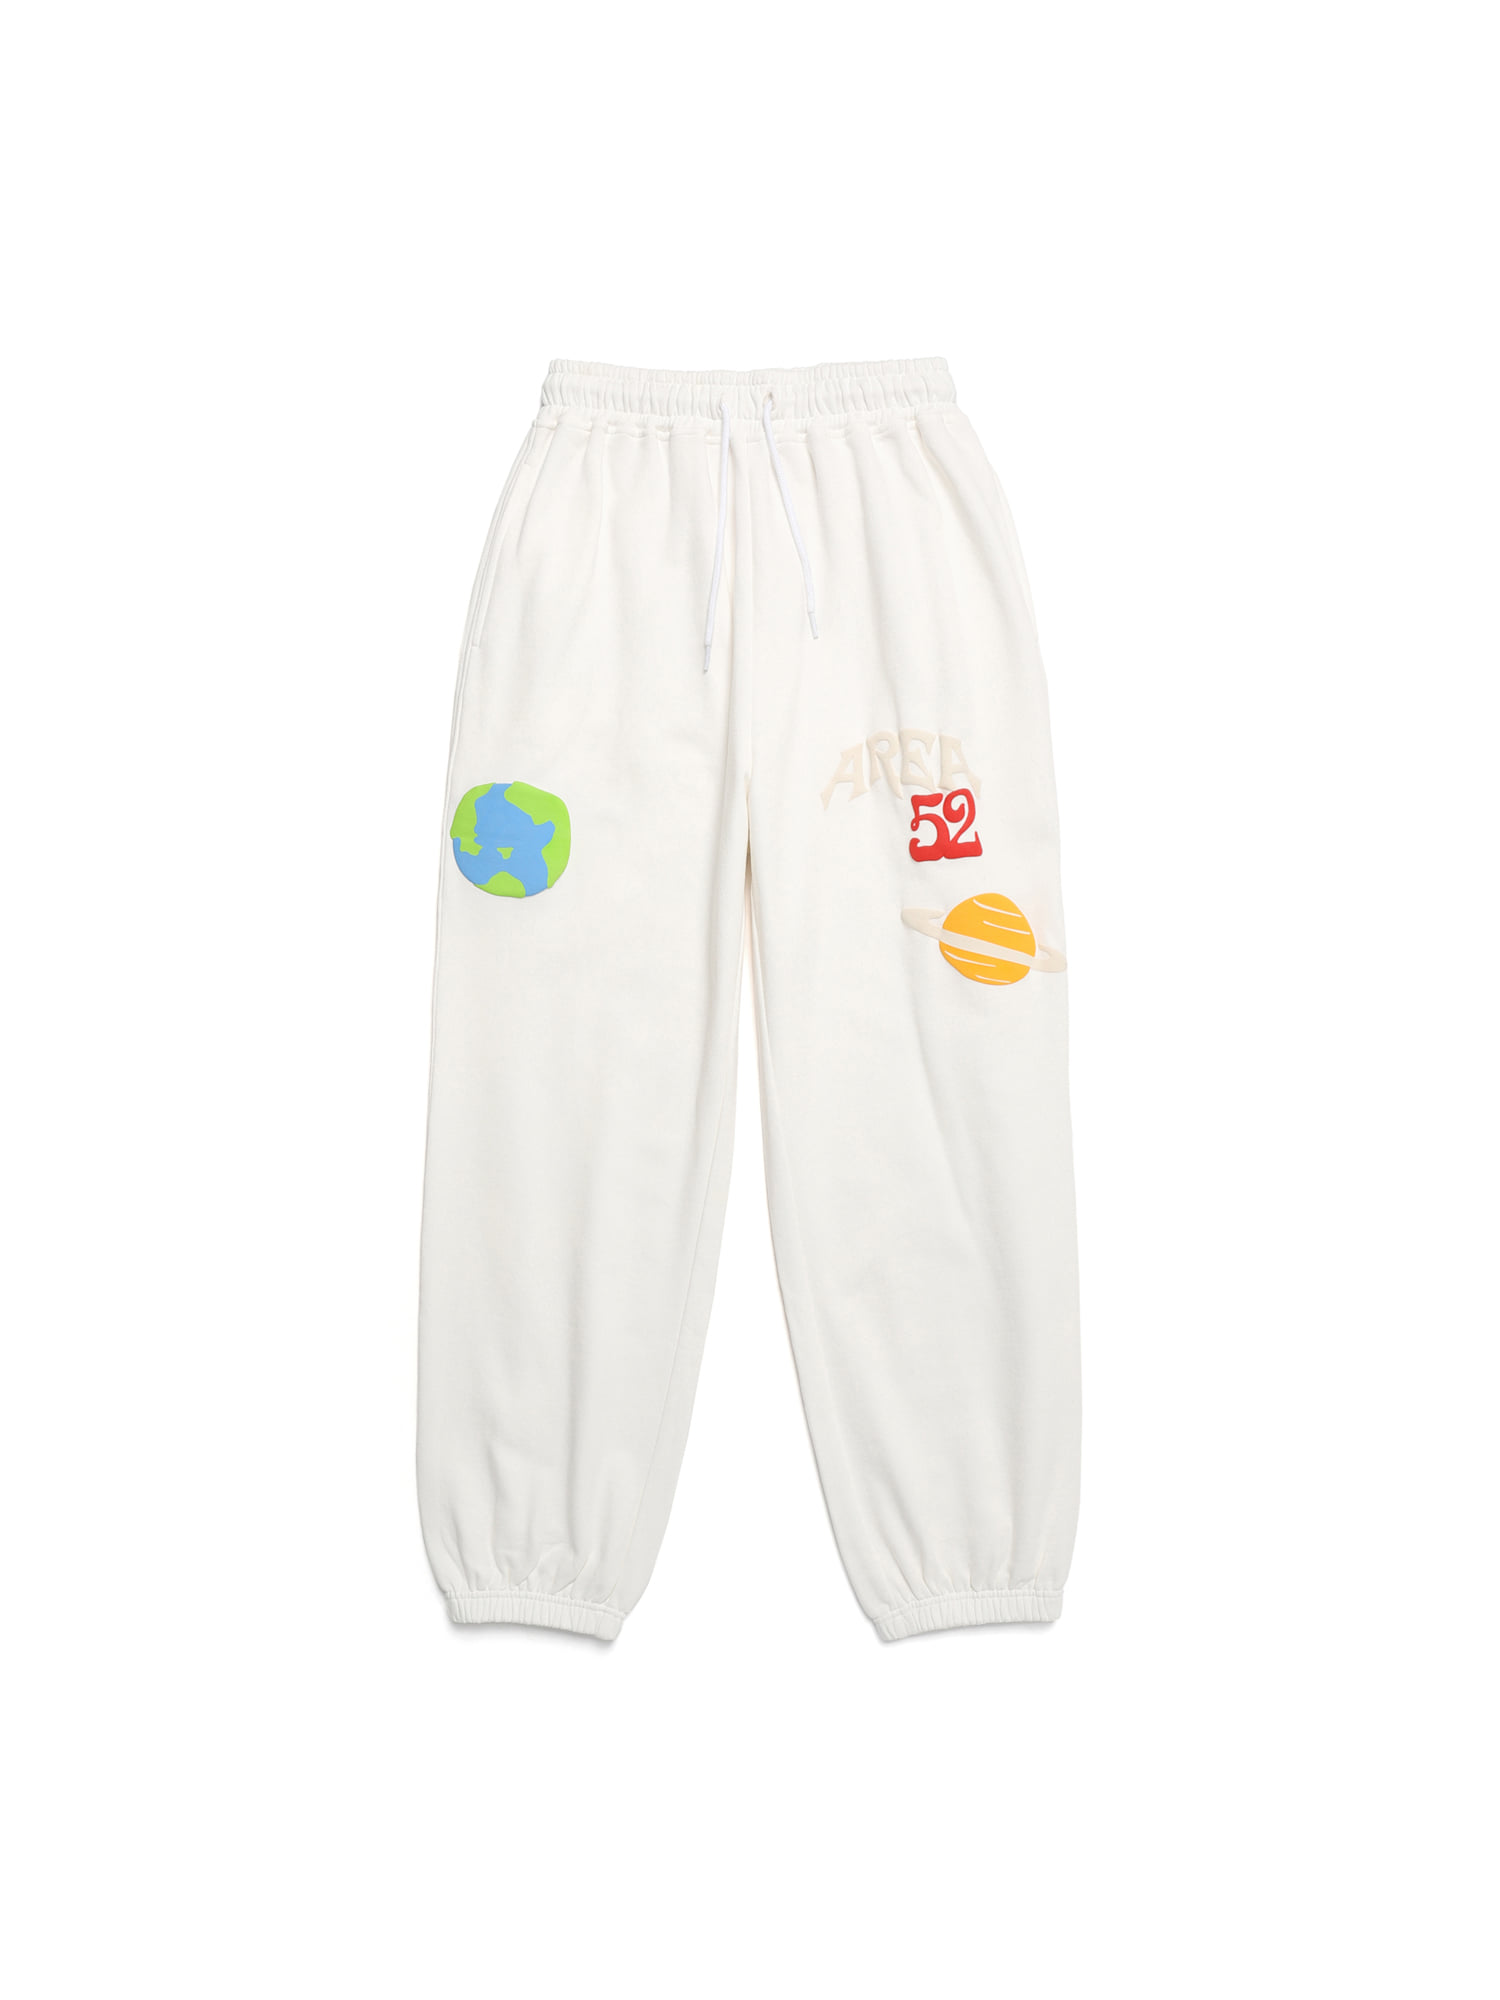 WD AREA 52 PANTS WHITE